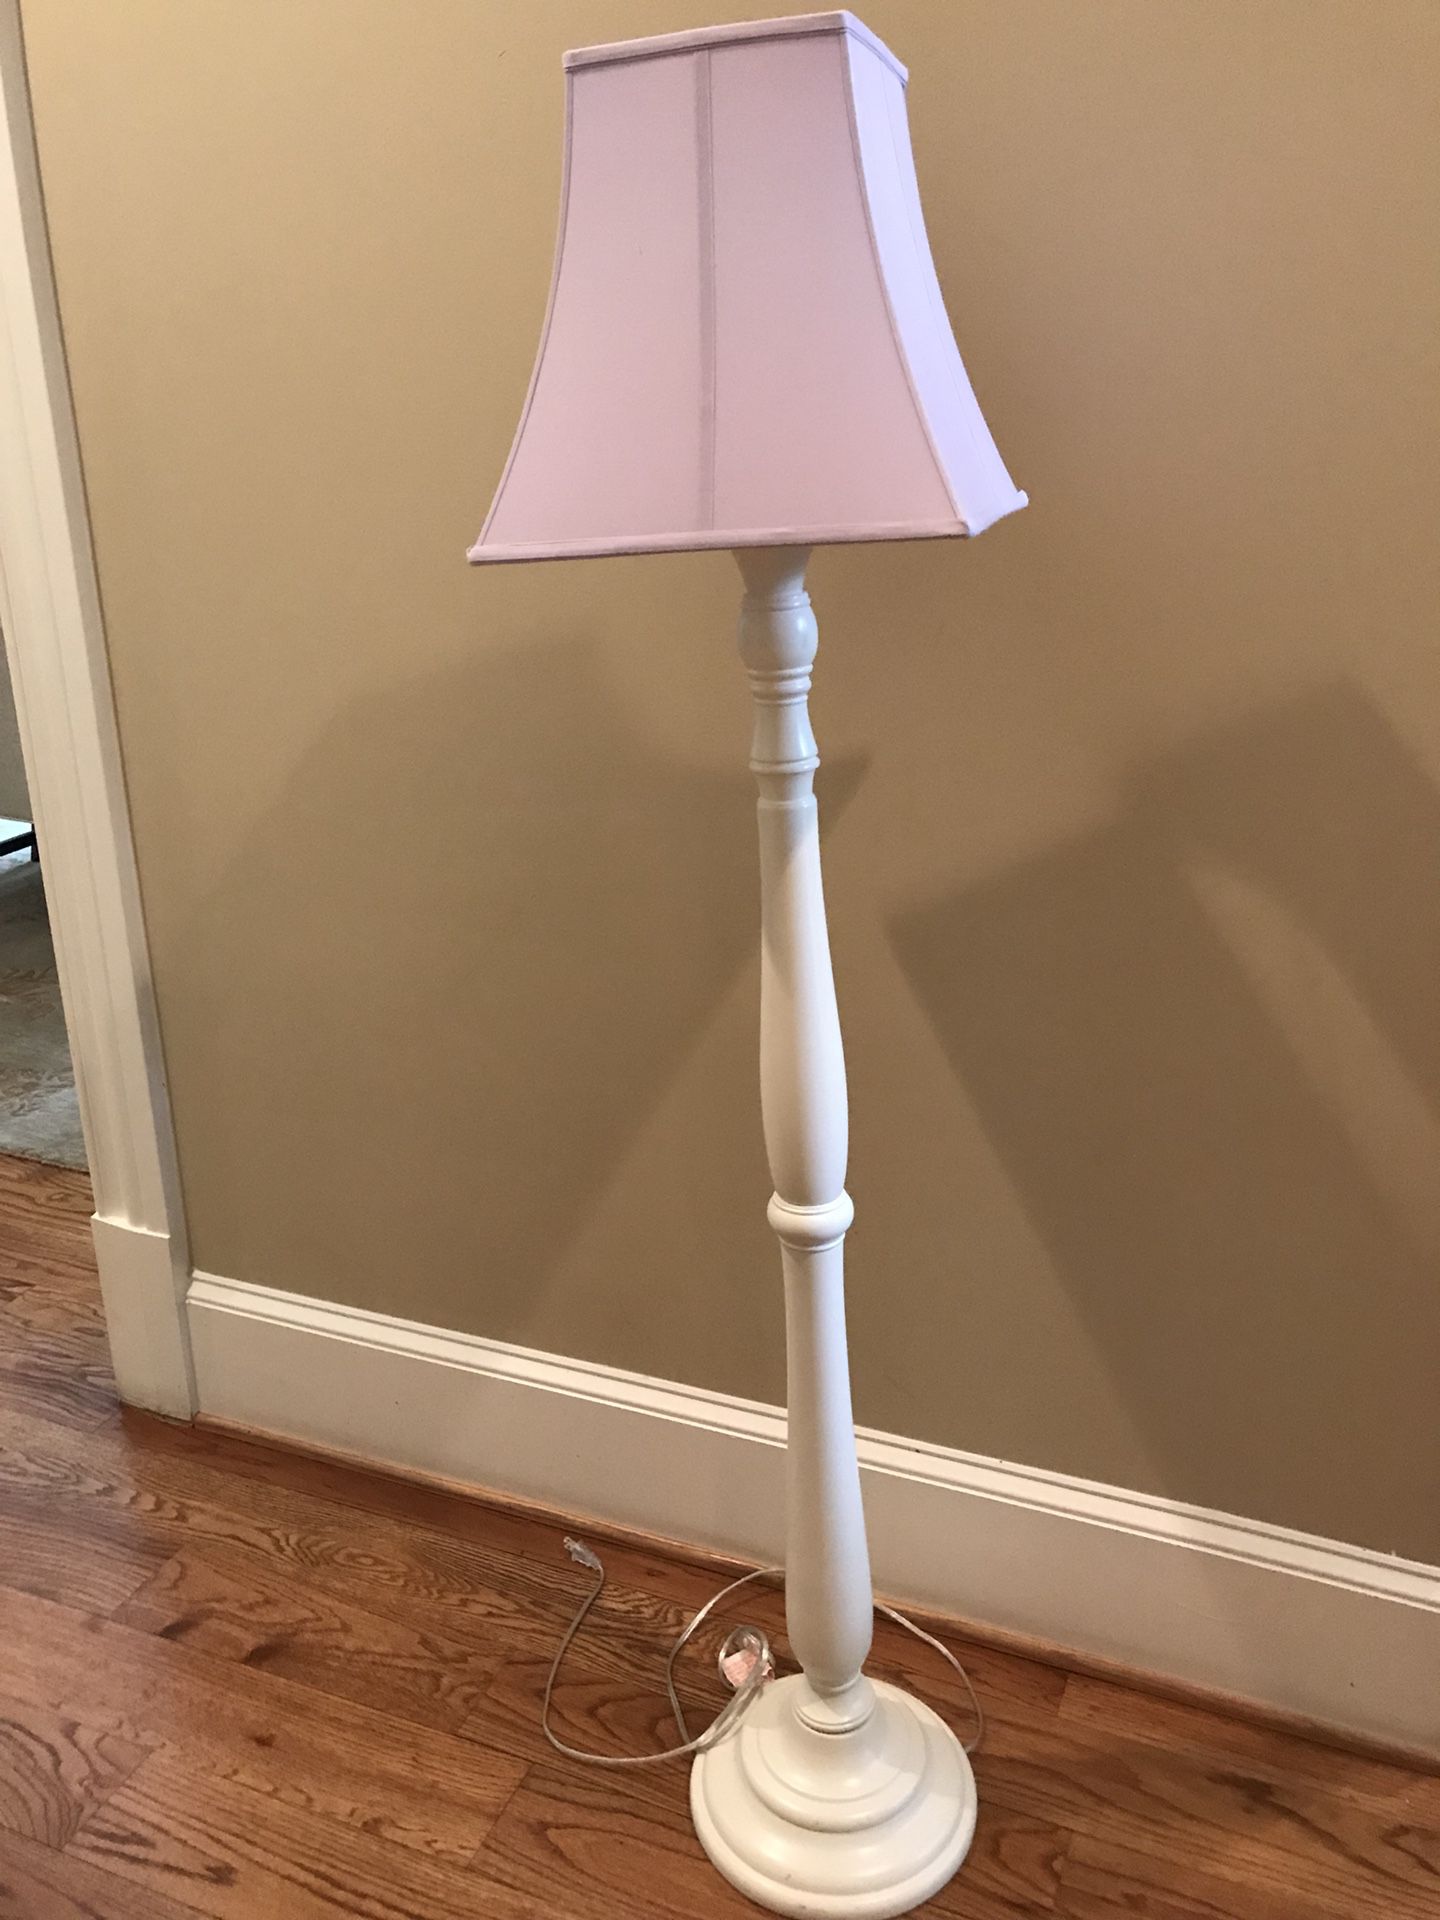 Pottery barn kids floor lamp - white base with lavender shade